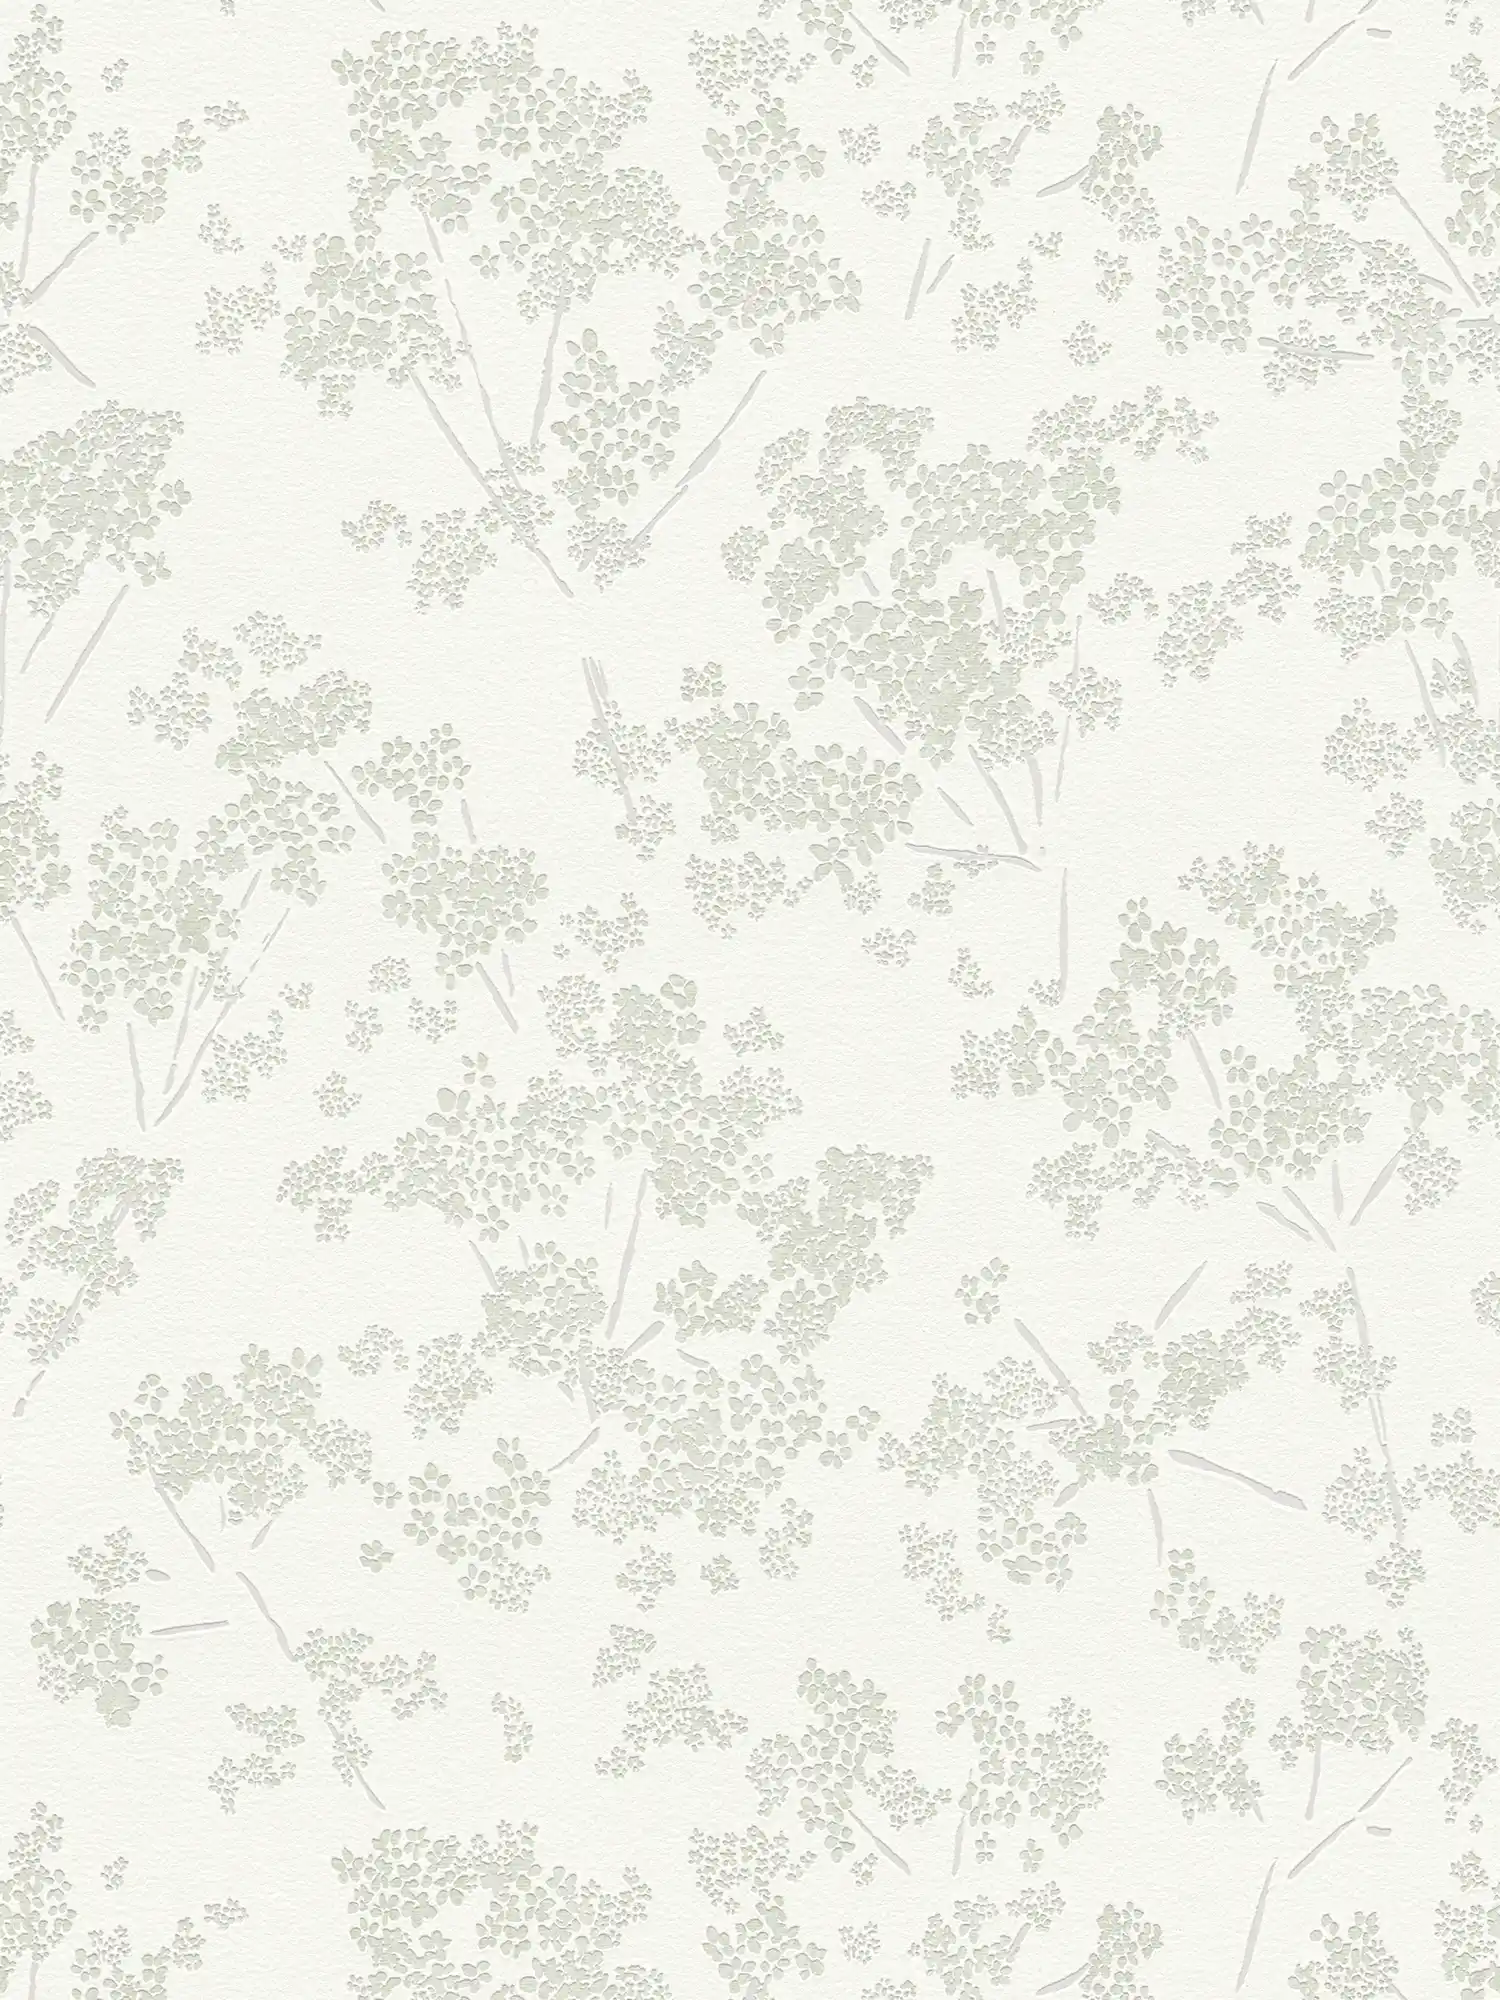 Non-woven wallpaper with floral pattern - white, green, grey
